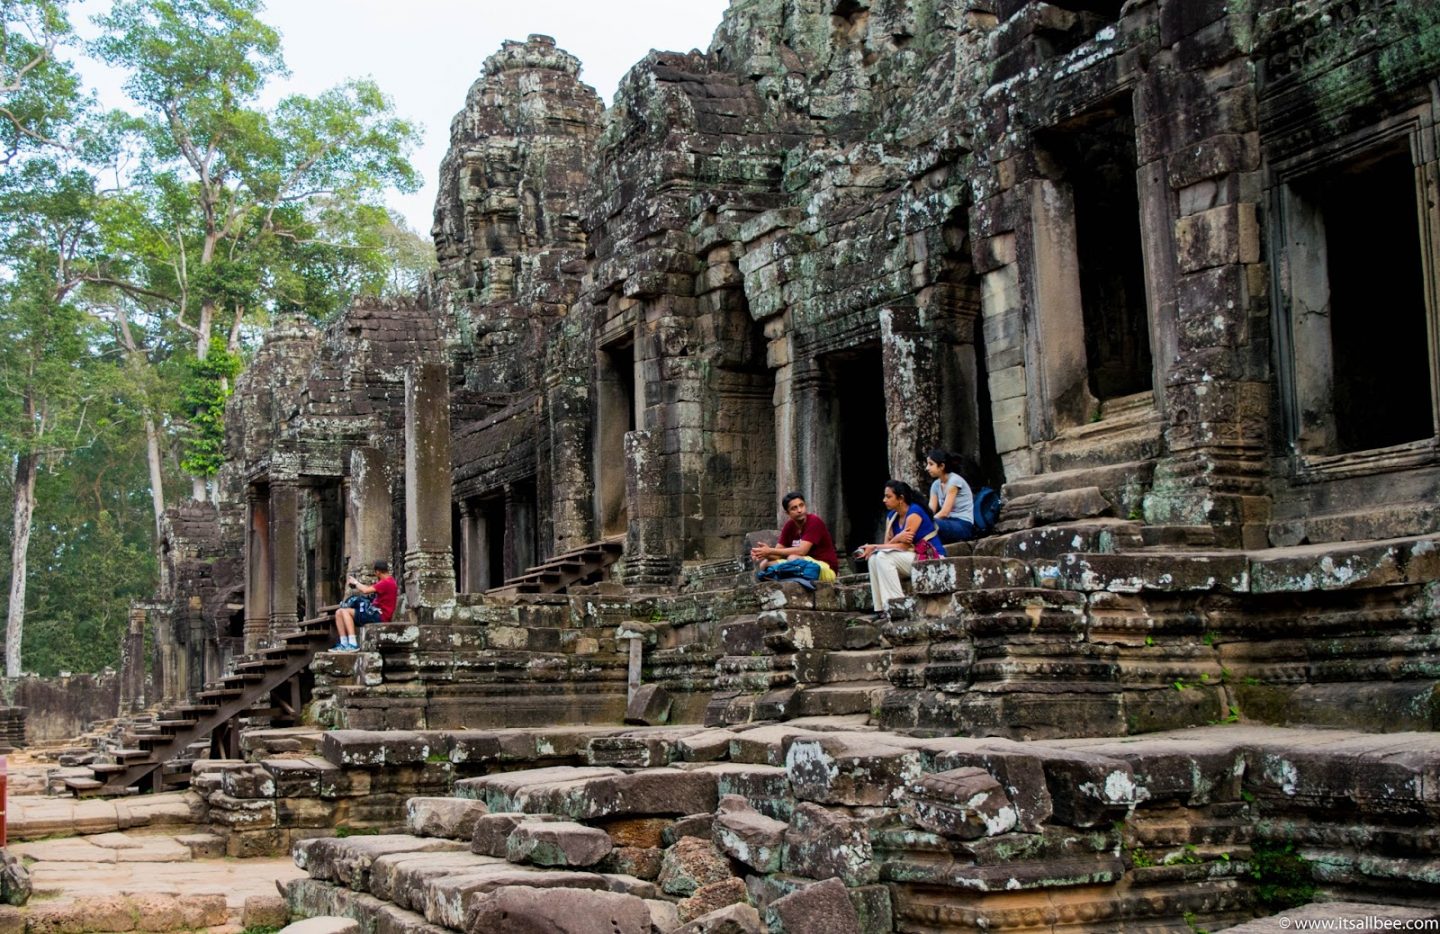 Cambodia Travel Itinerary - The perfect 7 day Cambodia itinerary. ANGKOR WAY TEMPLES - MARKETS - BEACHES & NIGHTLIFE. Visiting Siem Reap, Phnom Penh and Sihanoukville. Everthing you need to know from local customs, what to pack for Cambodia, how many days to spend in Siem Reap and Angkor Wat. Plus where to stay and how to get around. #asia #adventure #angkorwat #traveltips